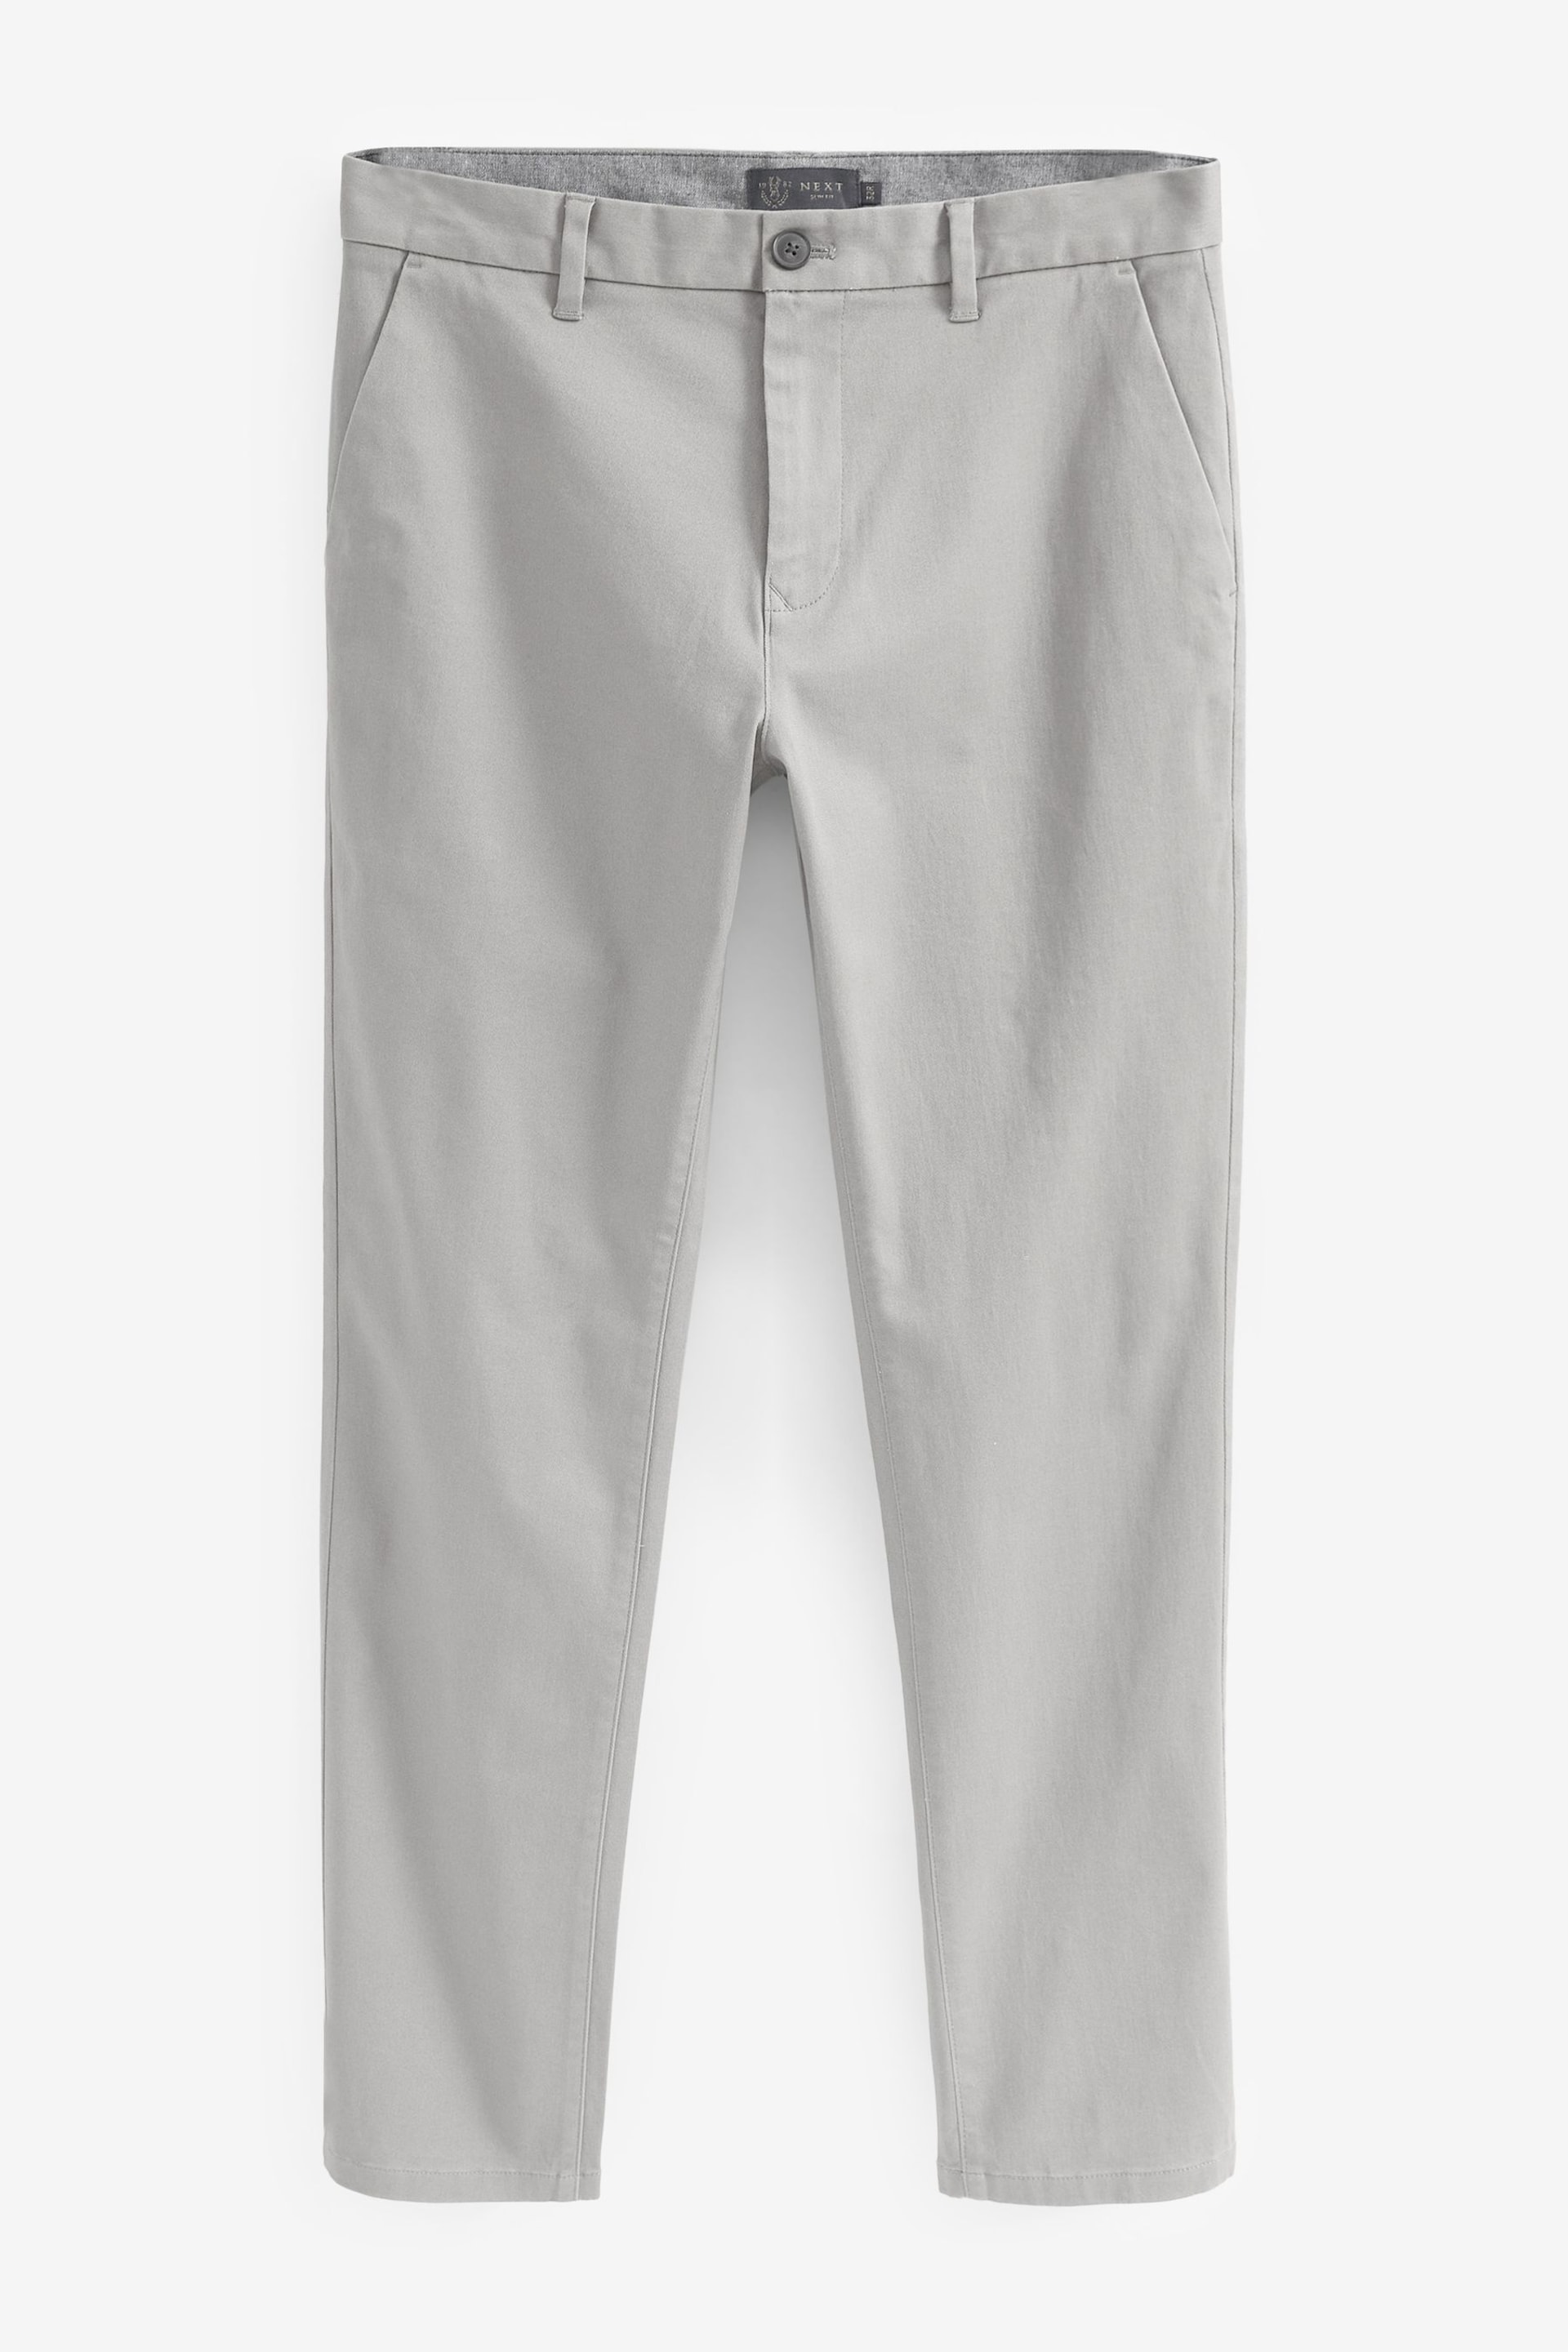 Mid Grey Slim Fit Stretch Chinos Trousers - Image 5 of 7